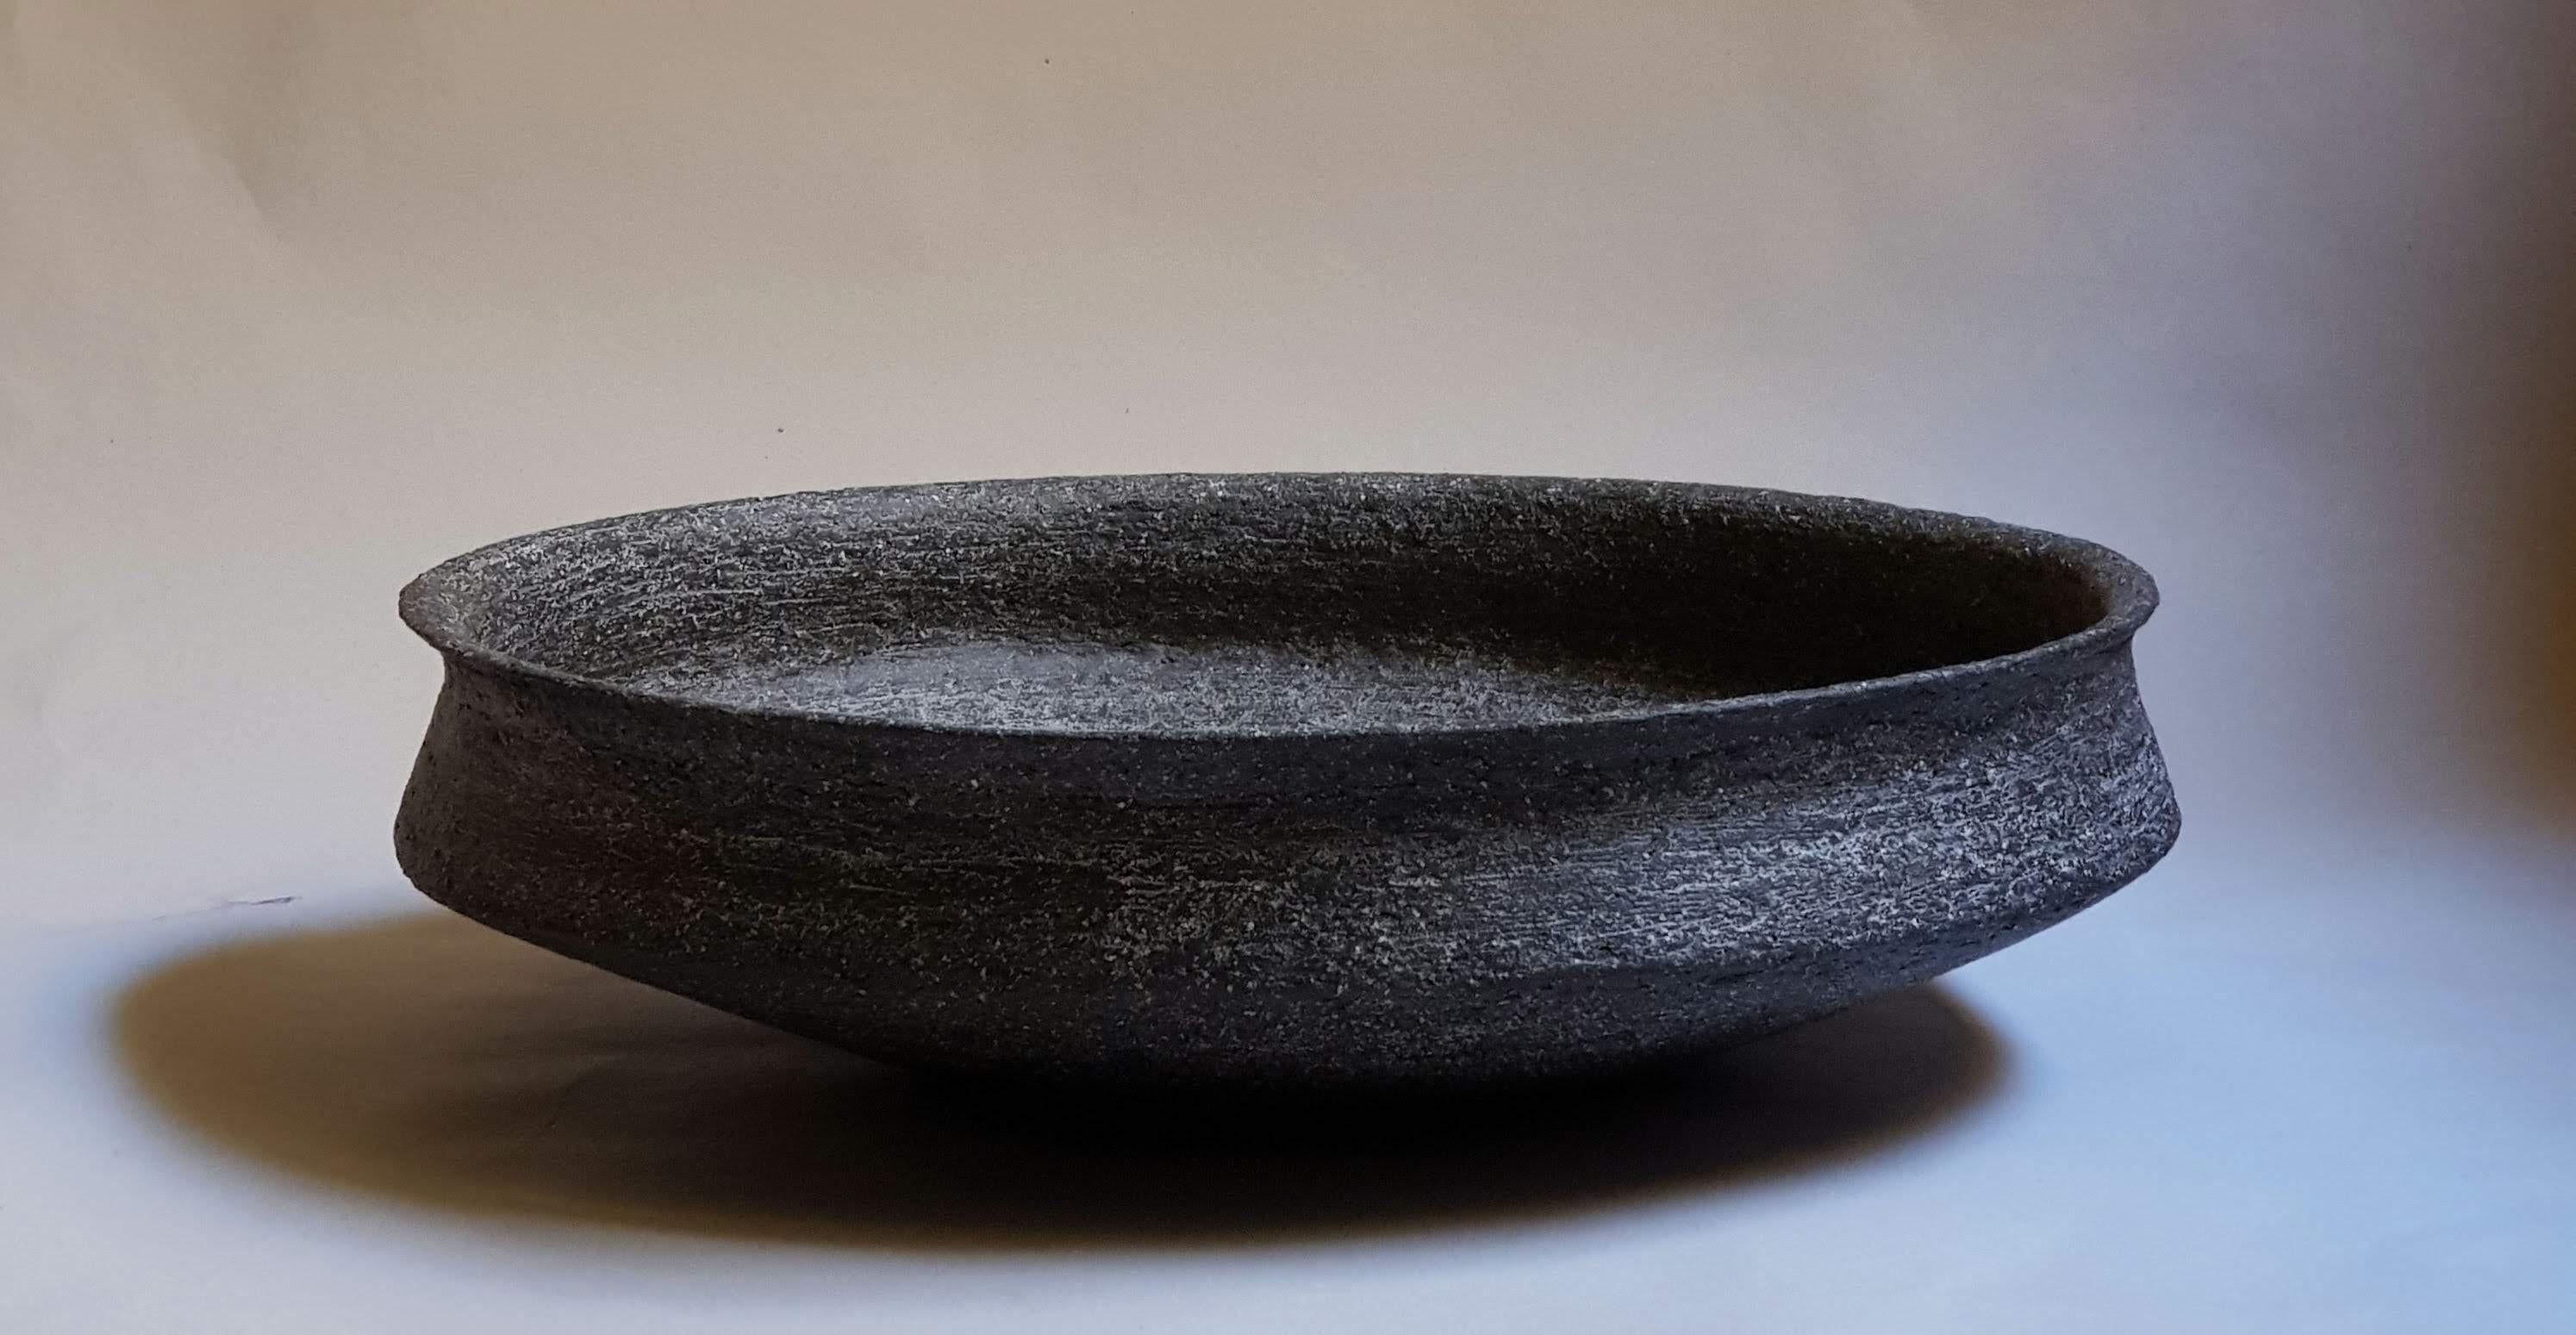 Black Stoneware Phiale Plate by Elena Vasilantonaki
Unique
Dimensions: ⌀ 30 x H 10 cm (Dimensions may vary)
Materials: Stoneware
Available finishes: With\without handle - Black, White, Brown, Red, White Patina

Growing up in Greece I was surrounded